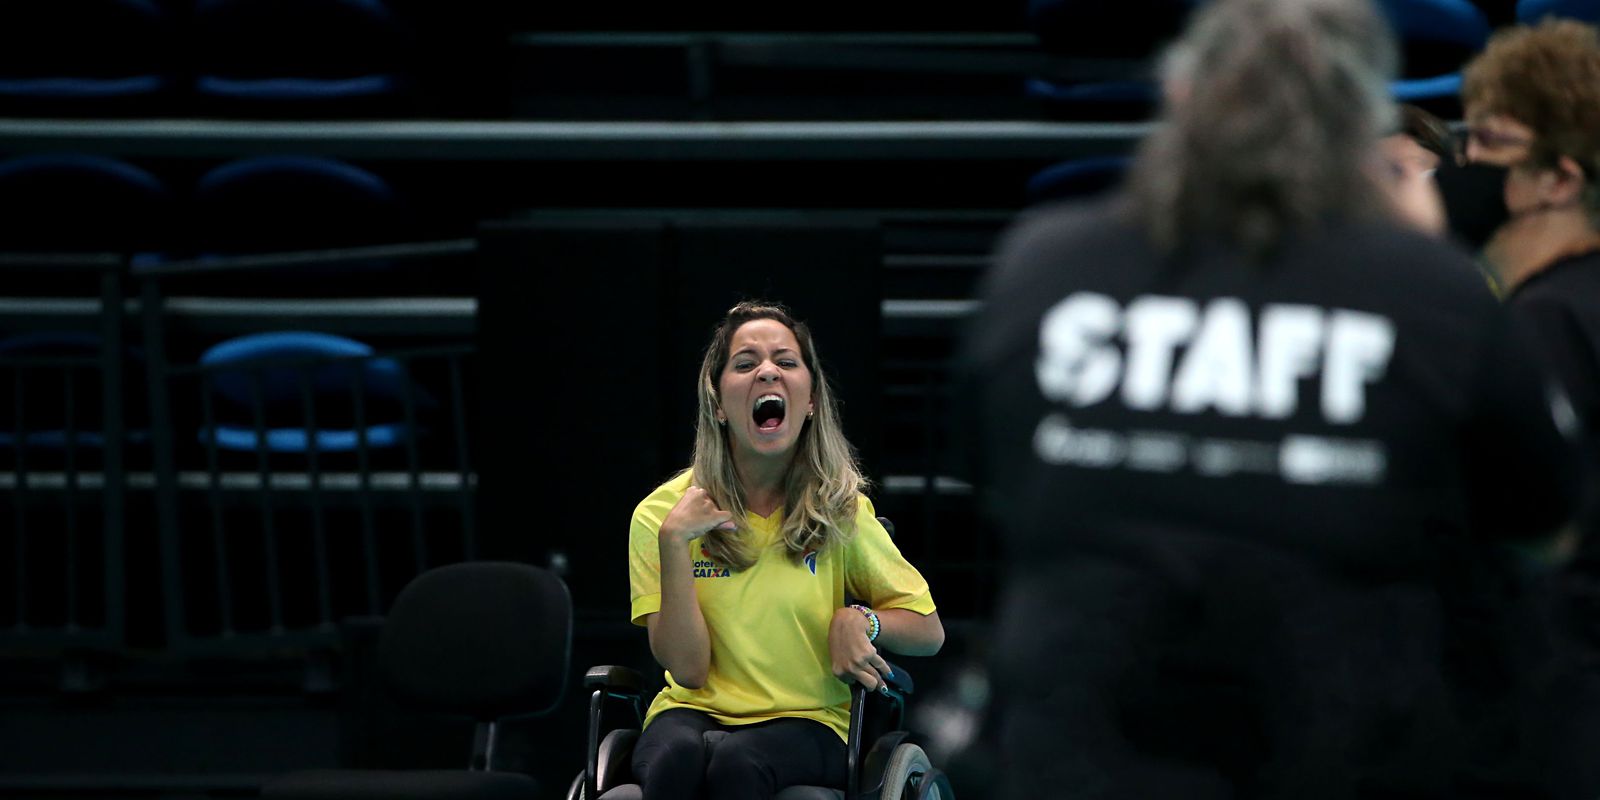 Andreza Vitória reaches the final at the Paralympic Boccia World Cup